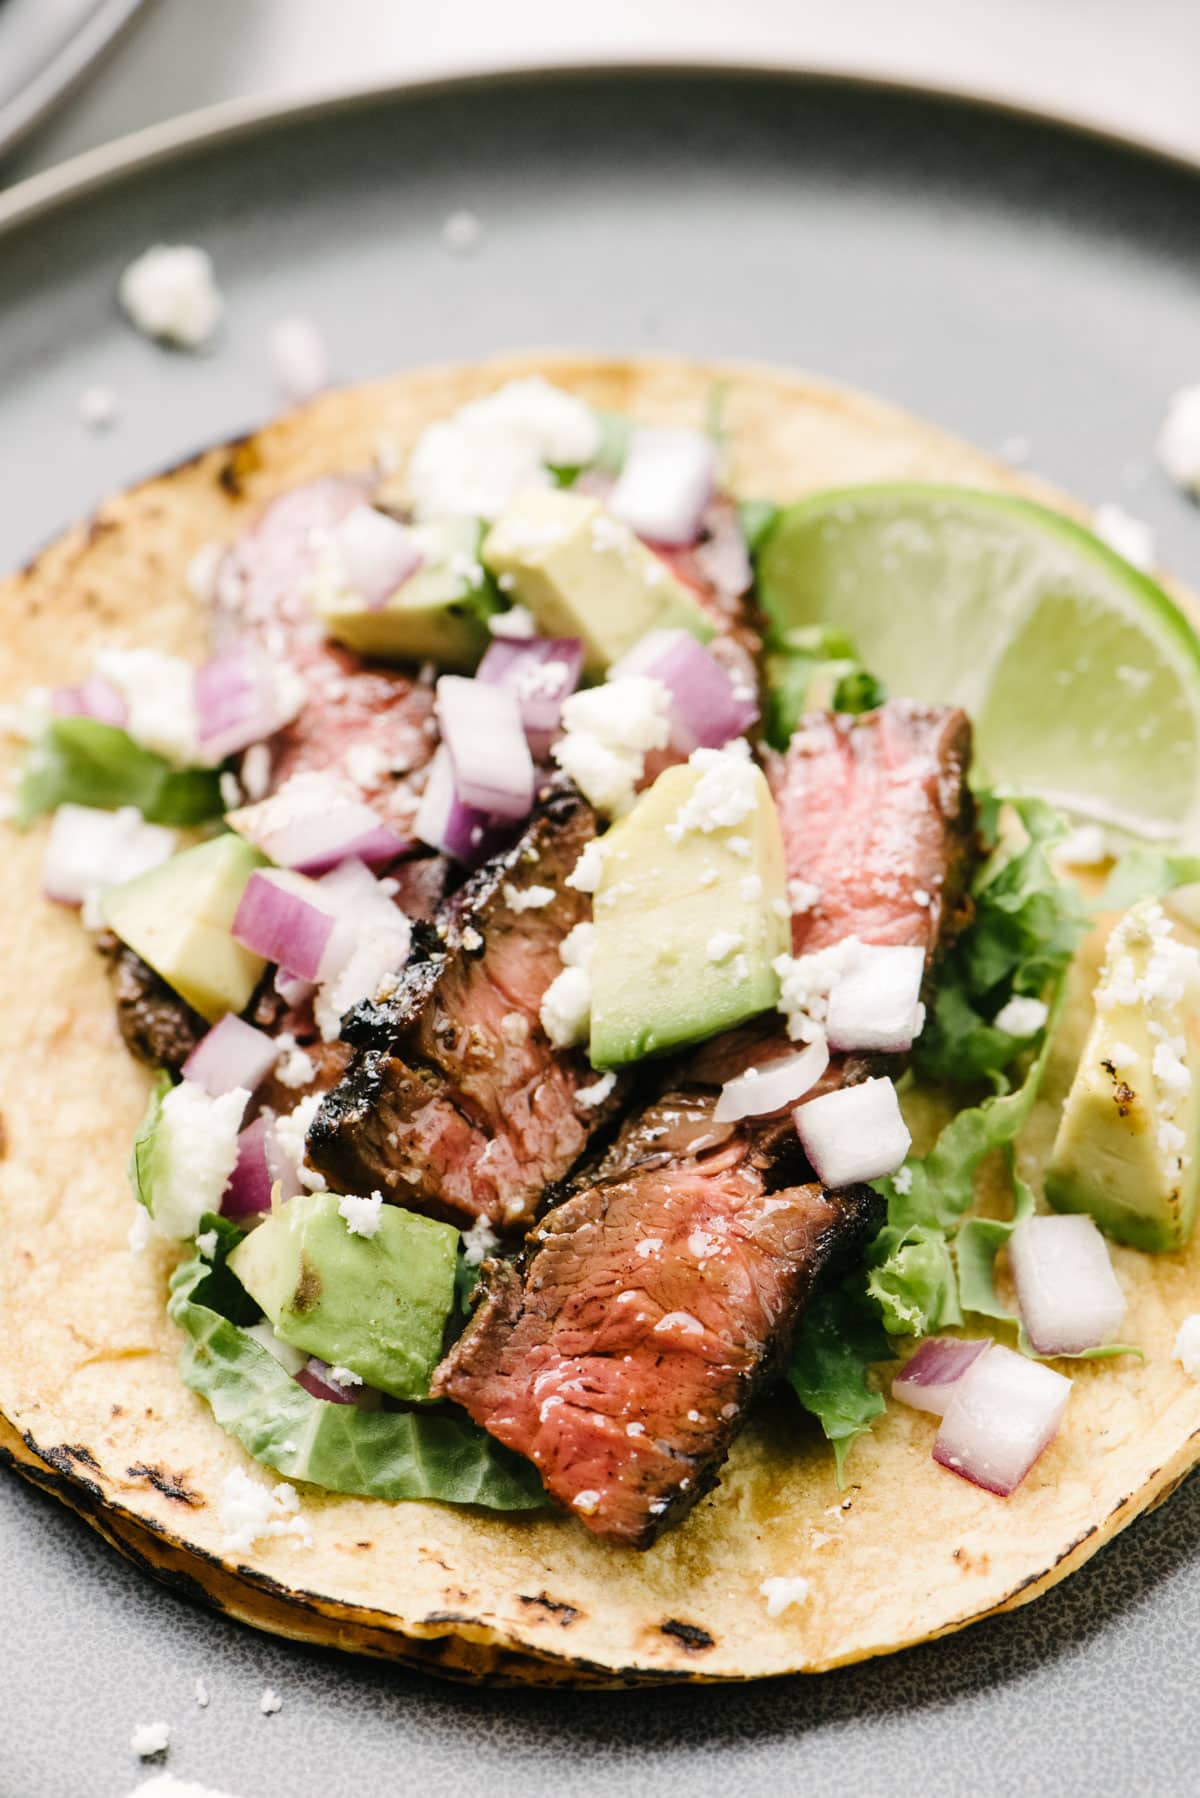 Side view, thin slices of skirt steak tucked into a corn tortilla and topped with avocado, red onion, and crumbled queso fresco cheese.